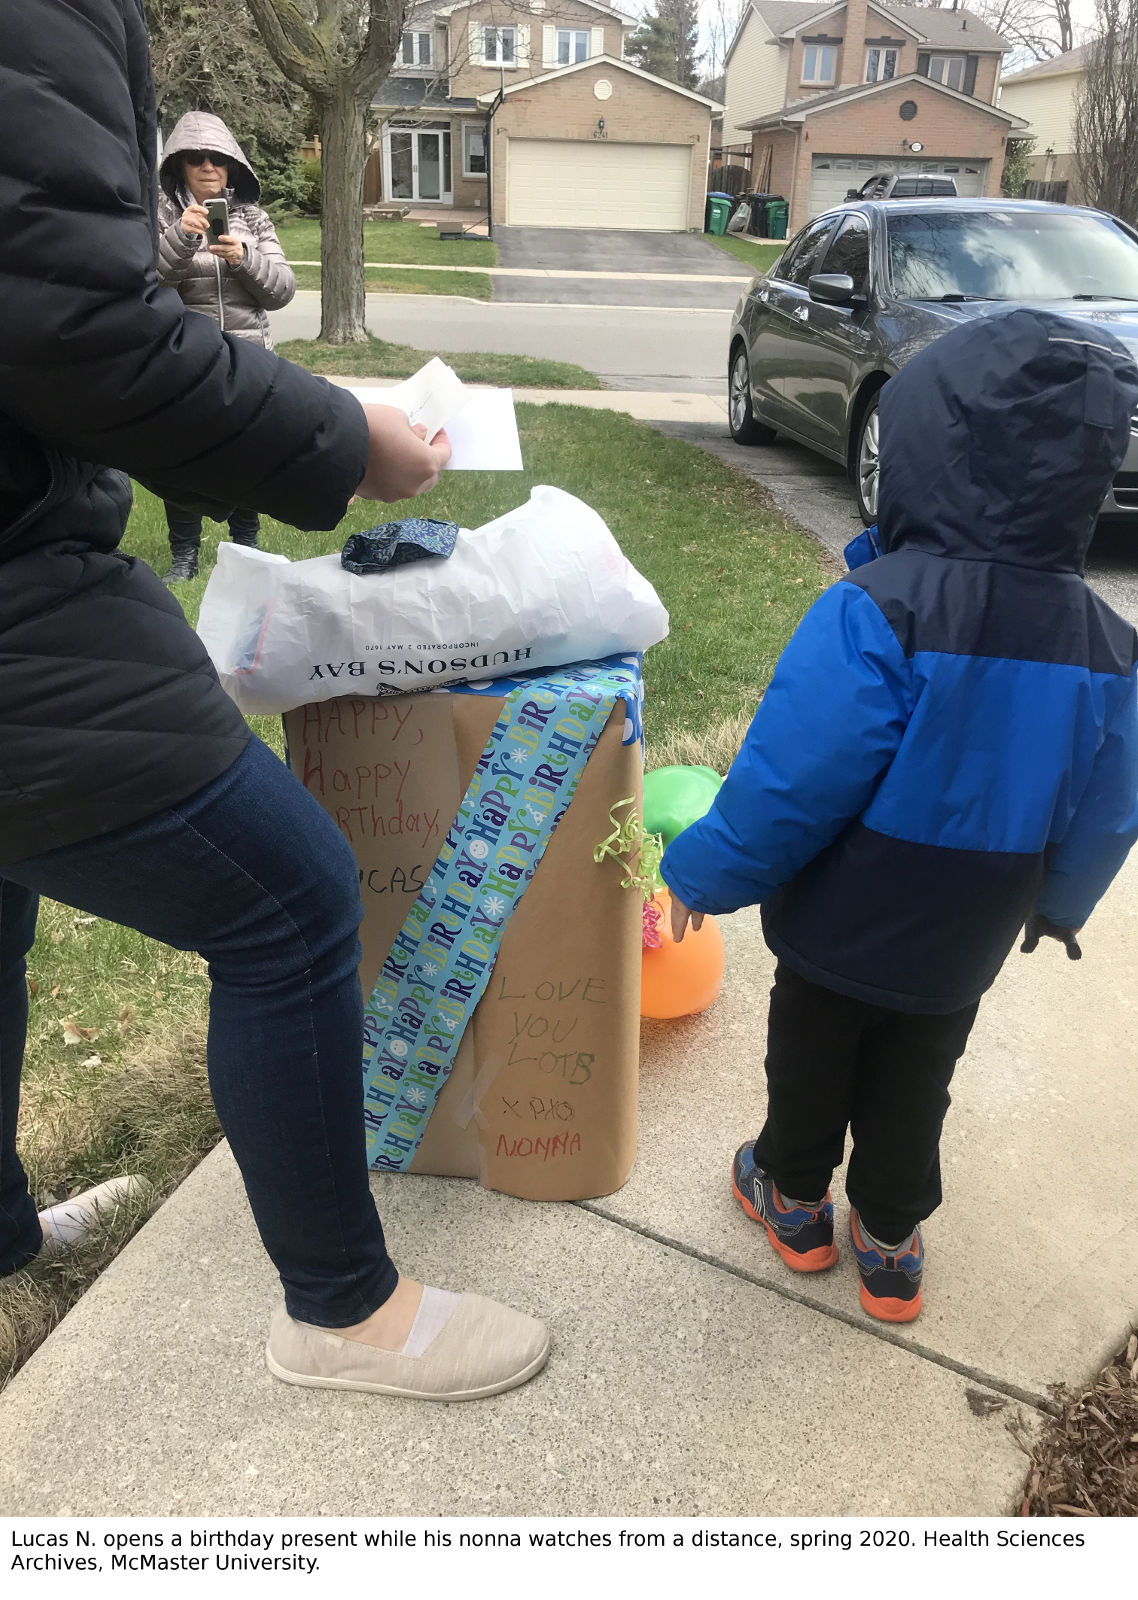 Lucas N. opens a birthday present while his nonna watches from a distance, spring 2020. Health Sciences Archives, McMaster University 